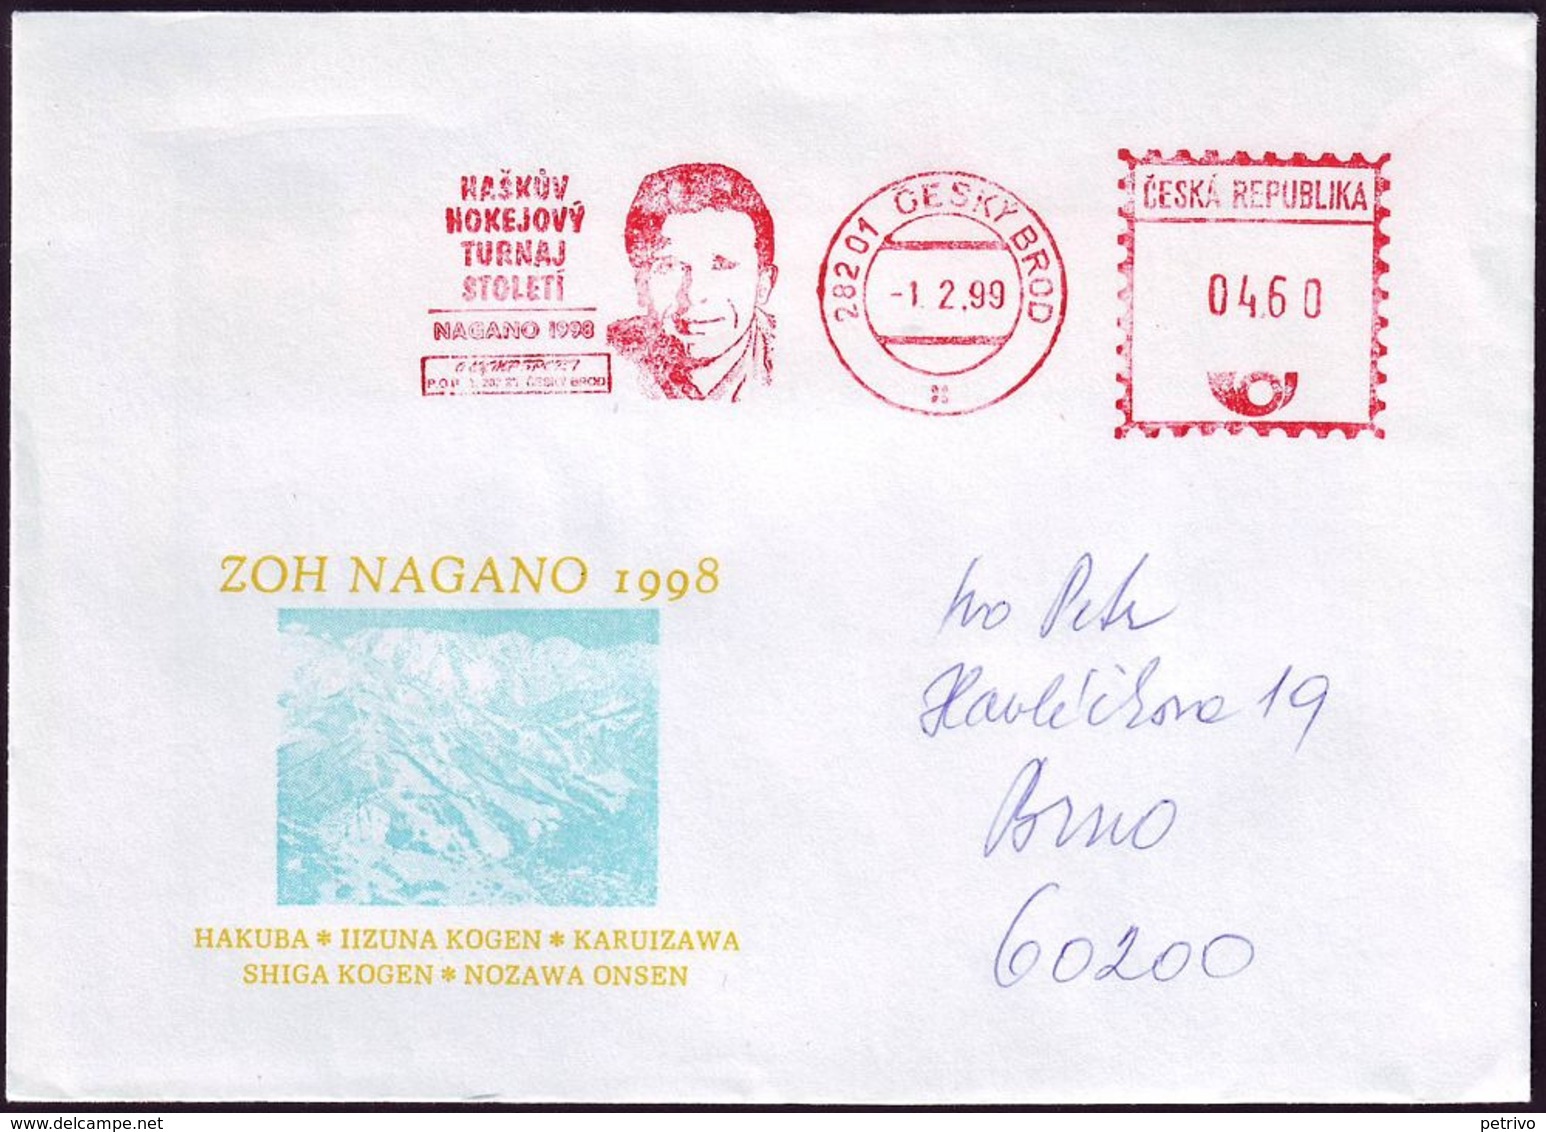 Czech Republic - 1999 - Winter Olympic Games 1998 - Cover - Inverno1998: Nagano